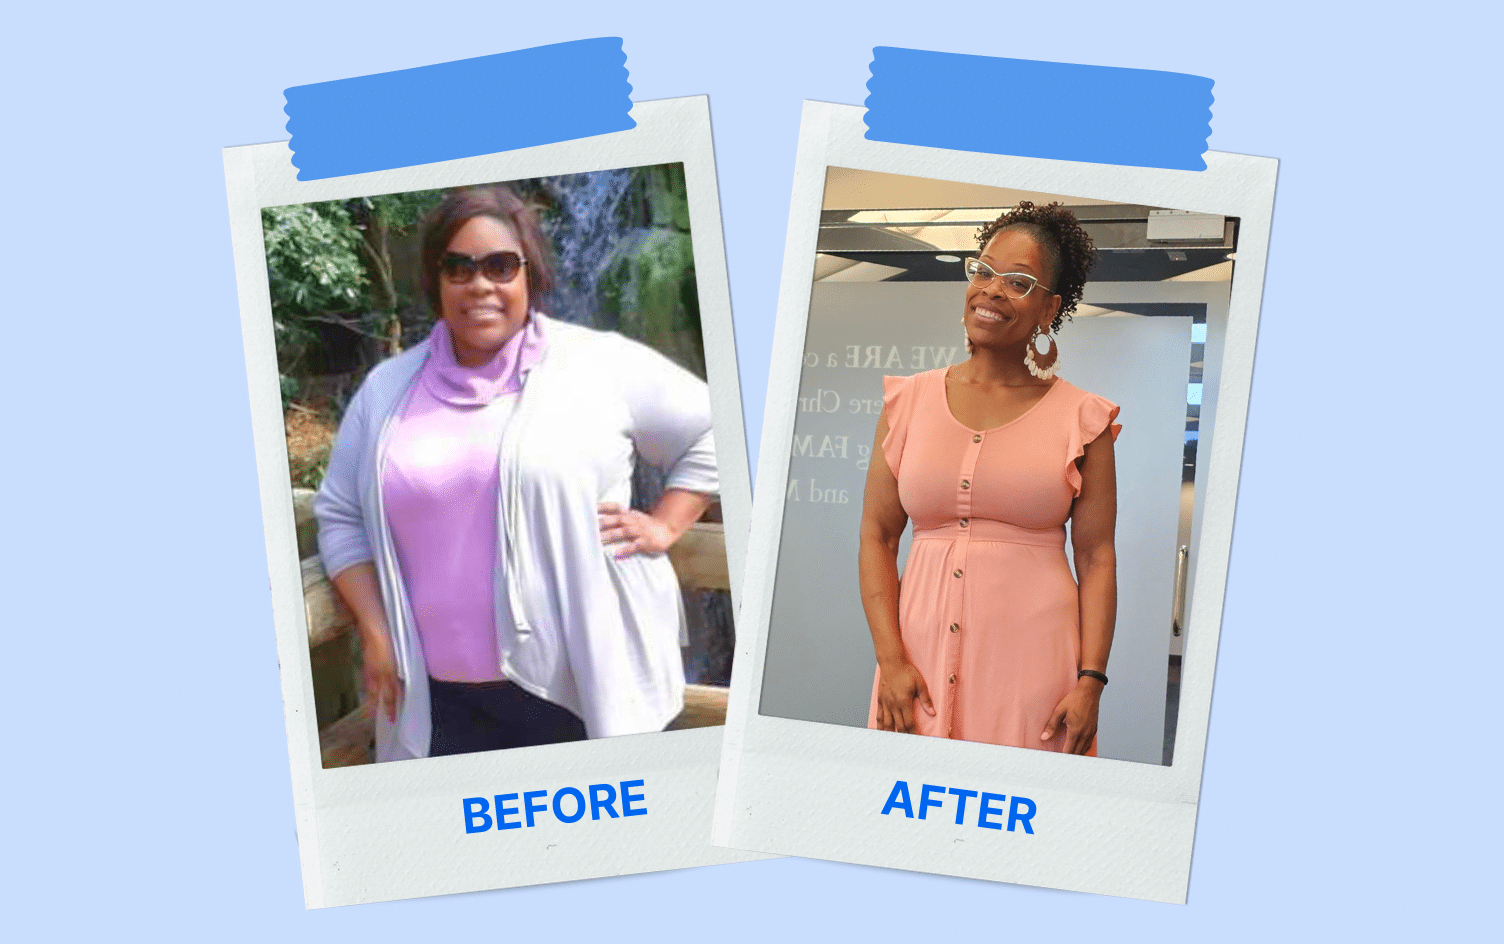 What Bridget Learned During Her Weight Loss Journey—From 385 to 184 Pounds | MyFitnessPal